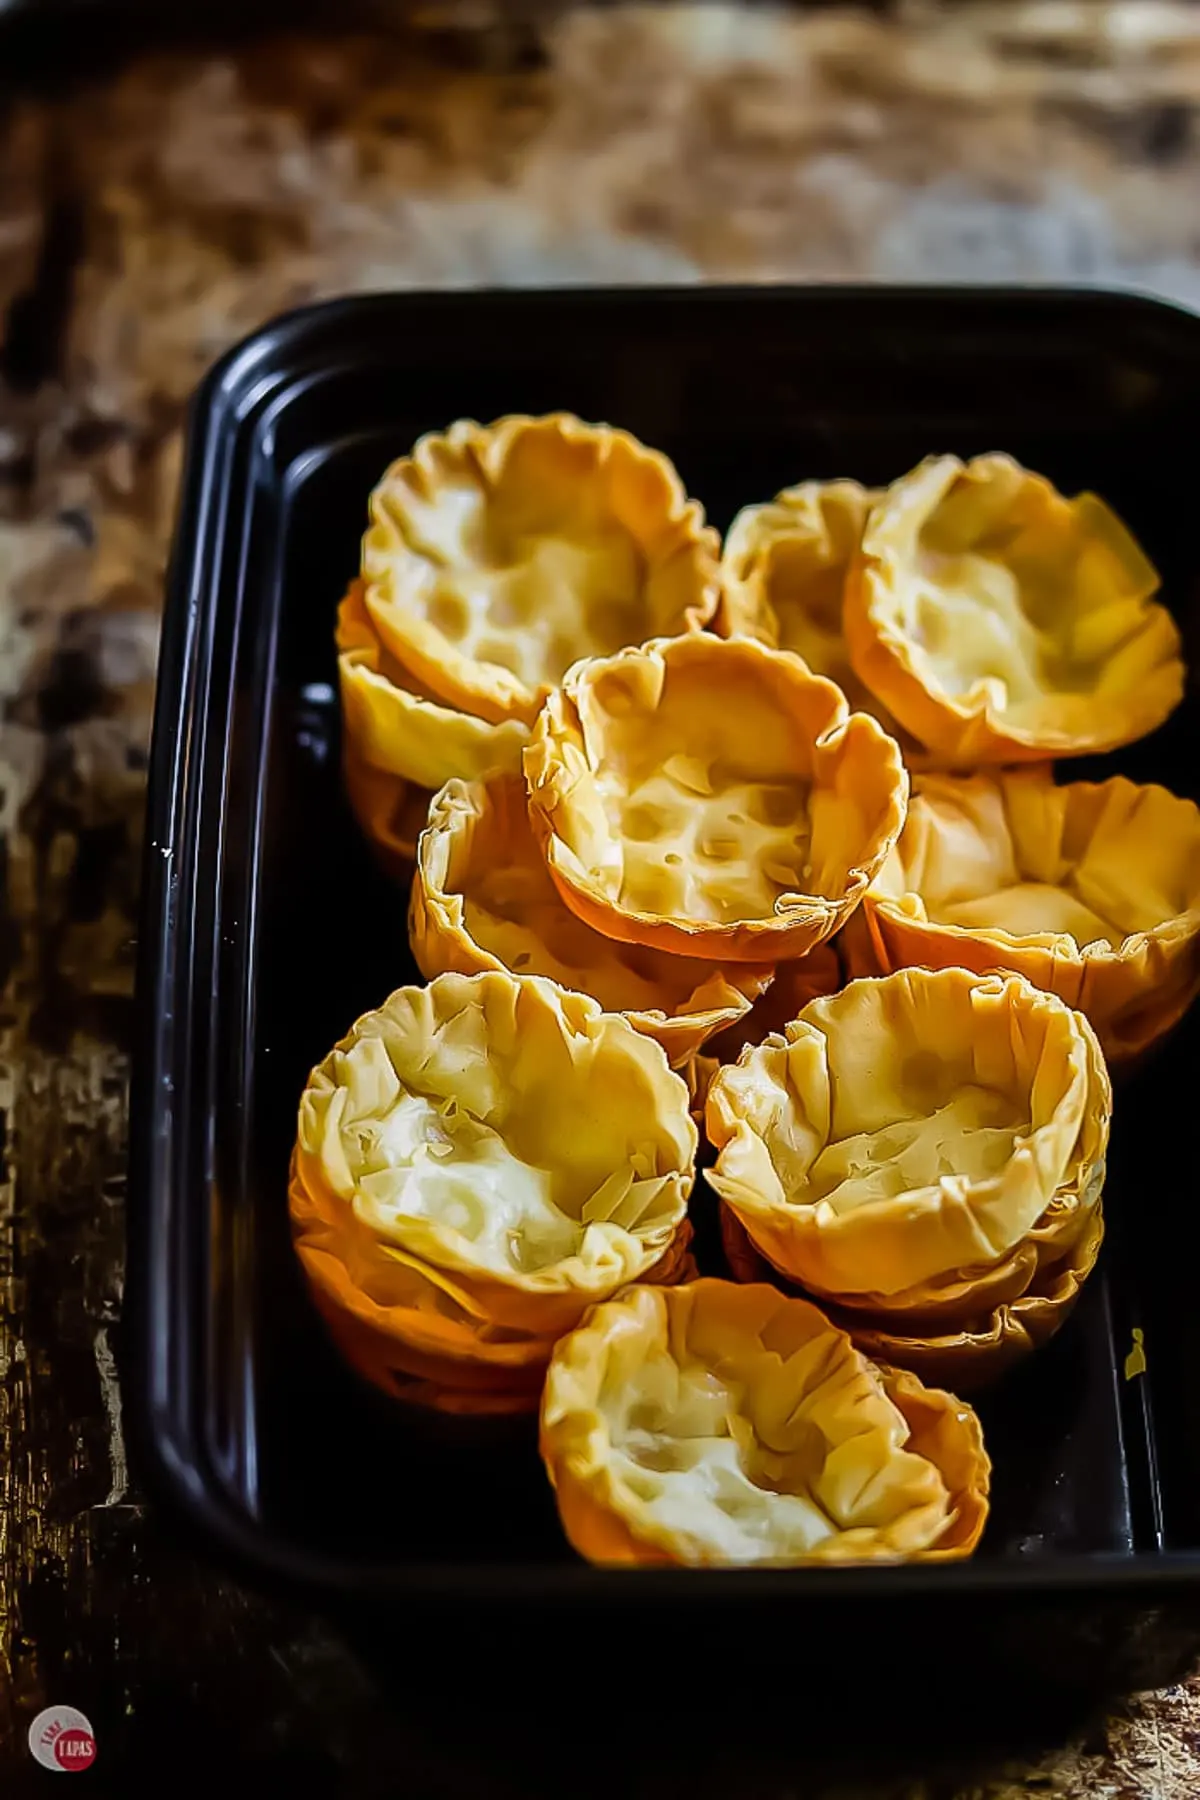 https://www.taketwotapas.com/wp-content/uploads/2021/10/Homemade-Phyllo-Cups-Take-Two-Tapas-17.jpg.webp